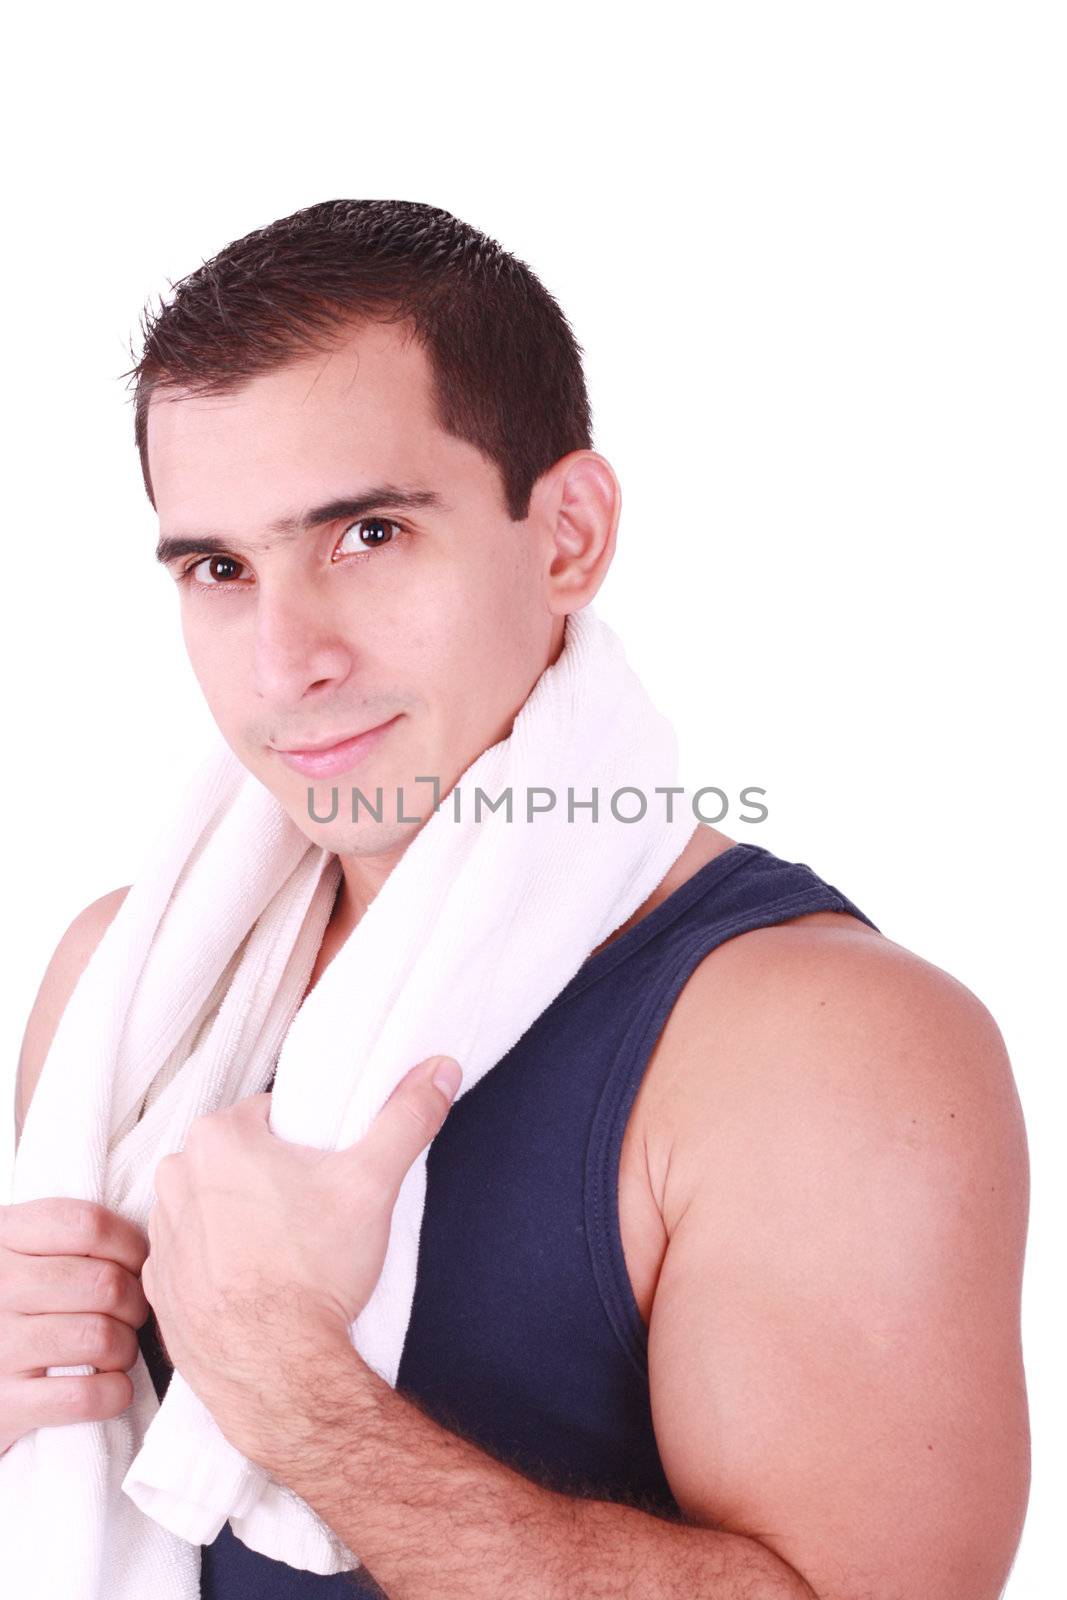 A young man just finishes his workout and with towel over his sh by dacasdo